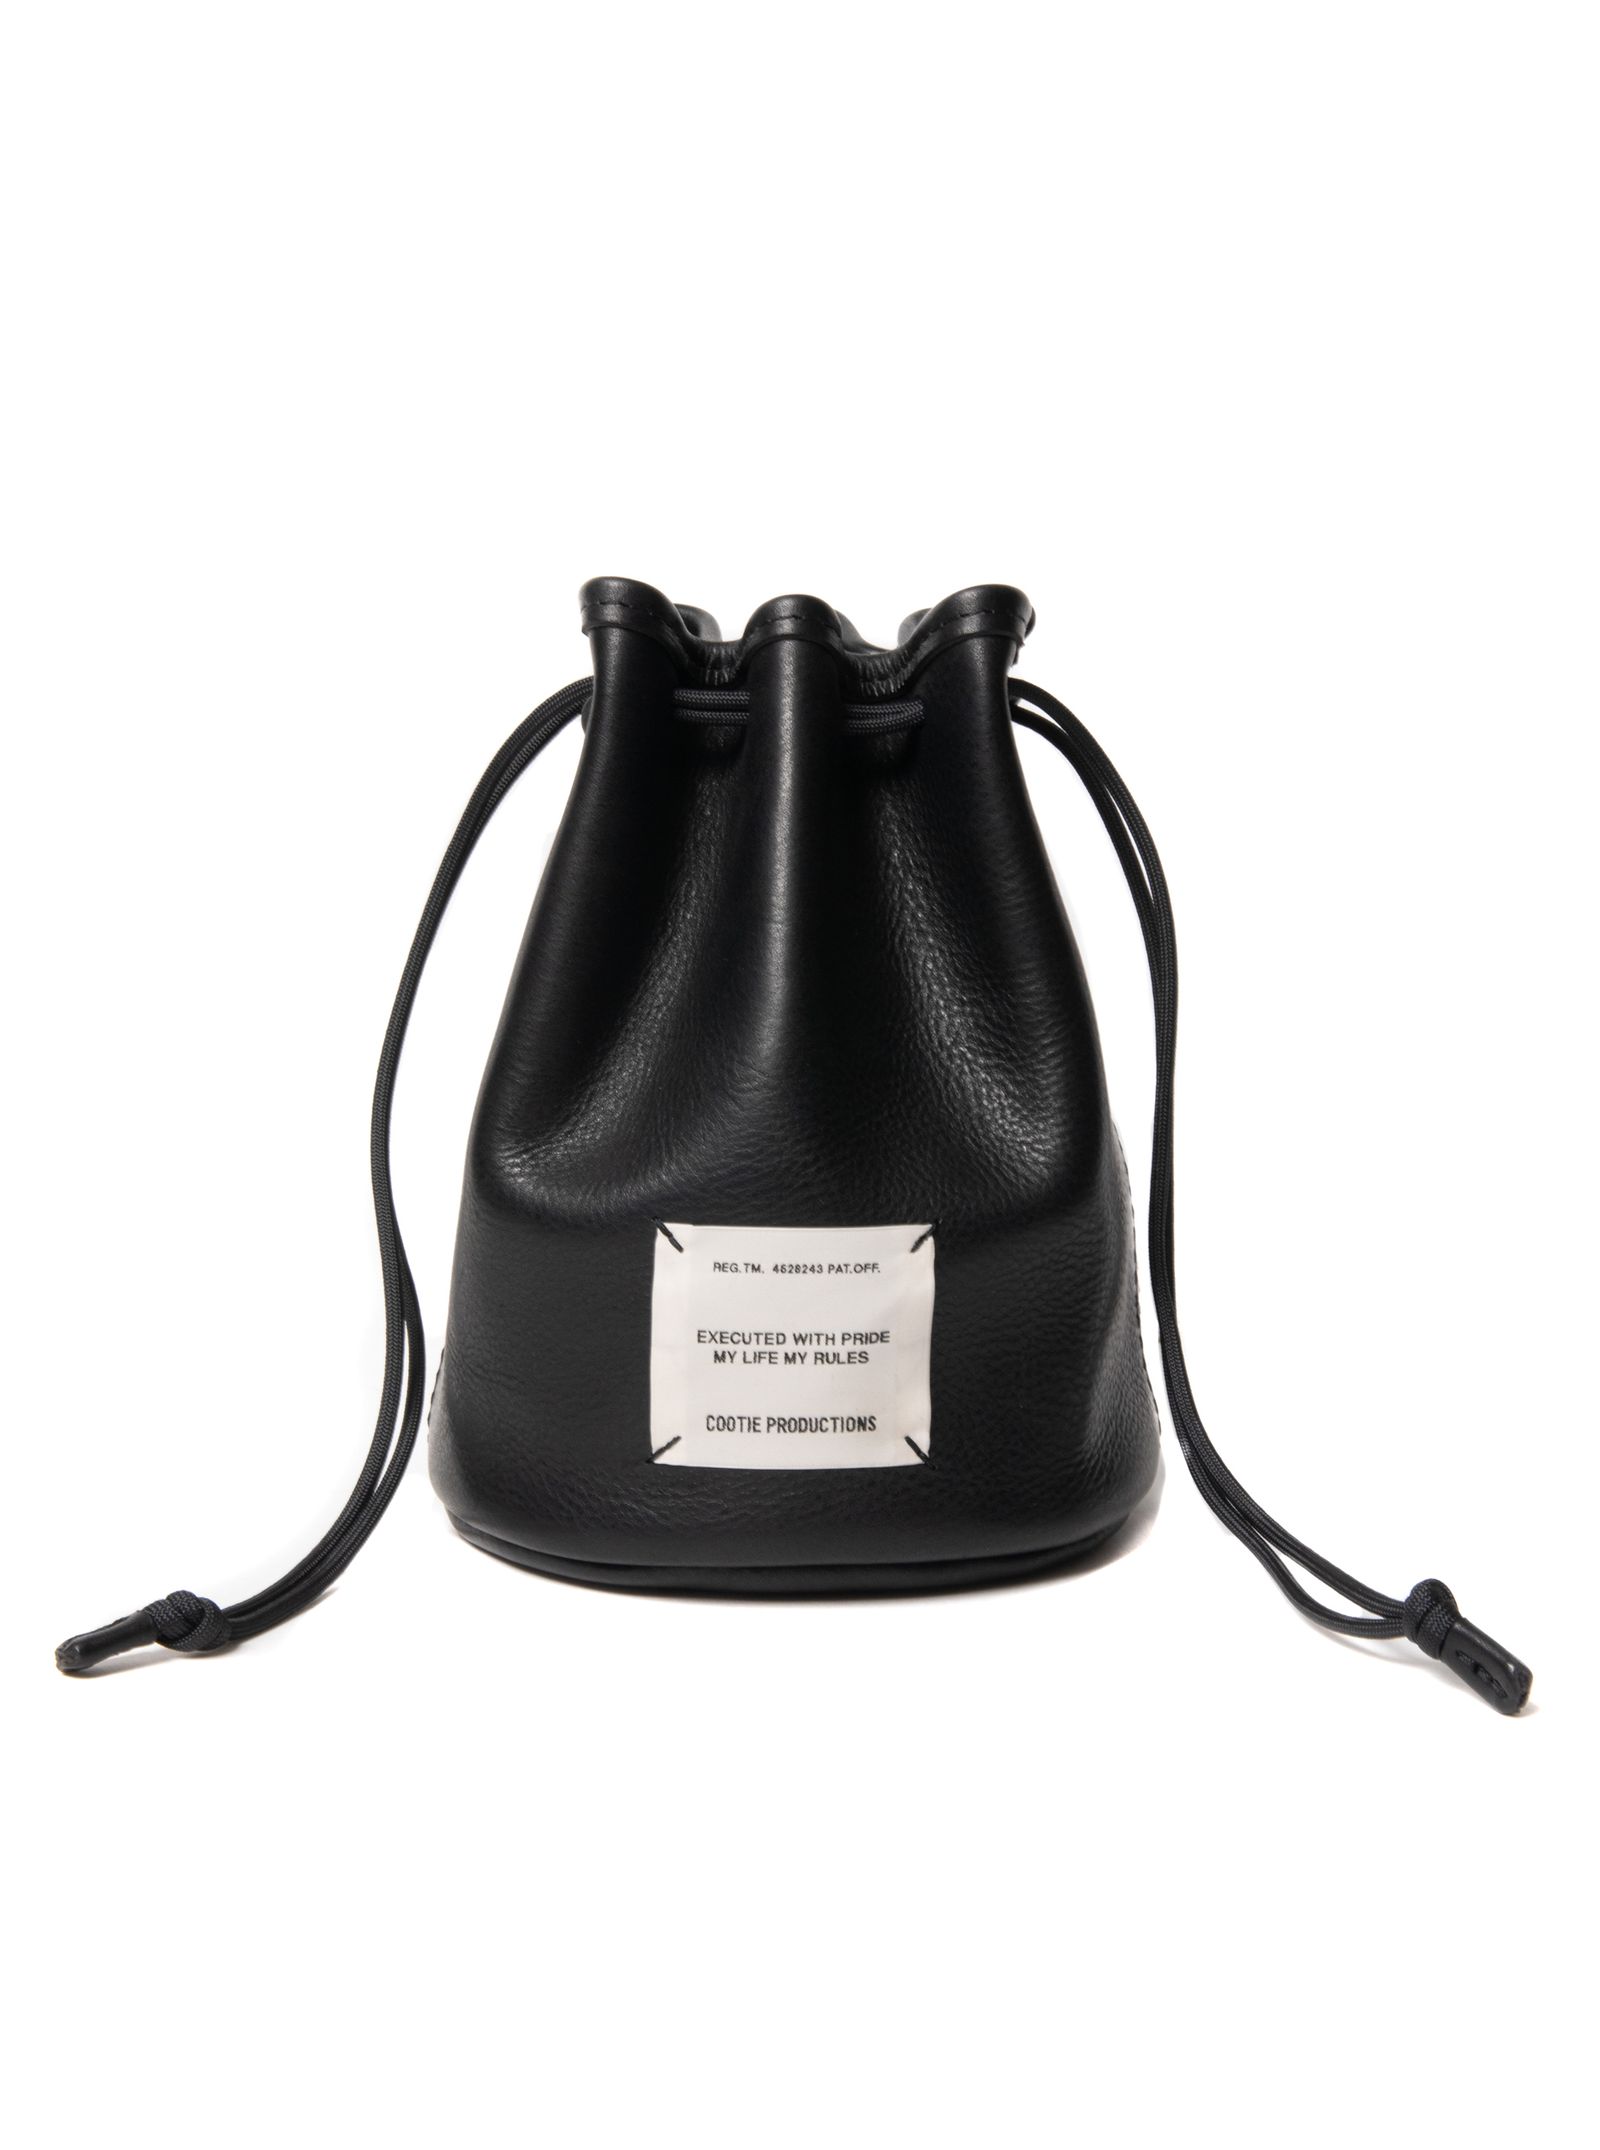 COOTIE PRODUCTIONS - Leather Bucket Bag (BLACK) / レザー 巾着 